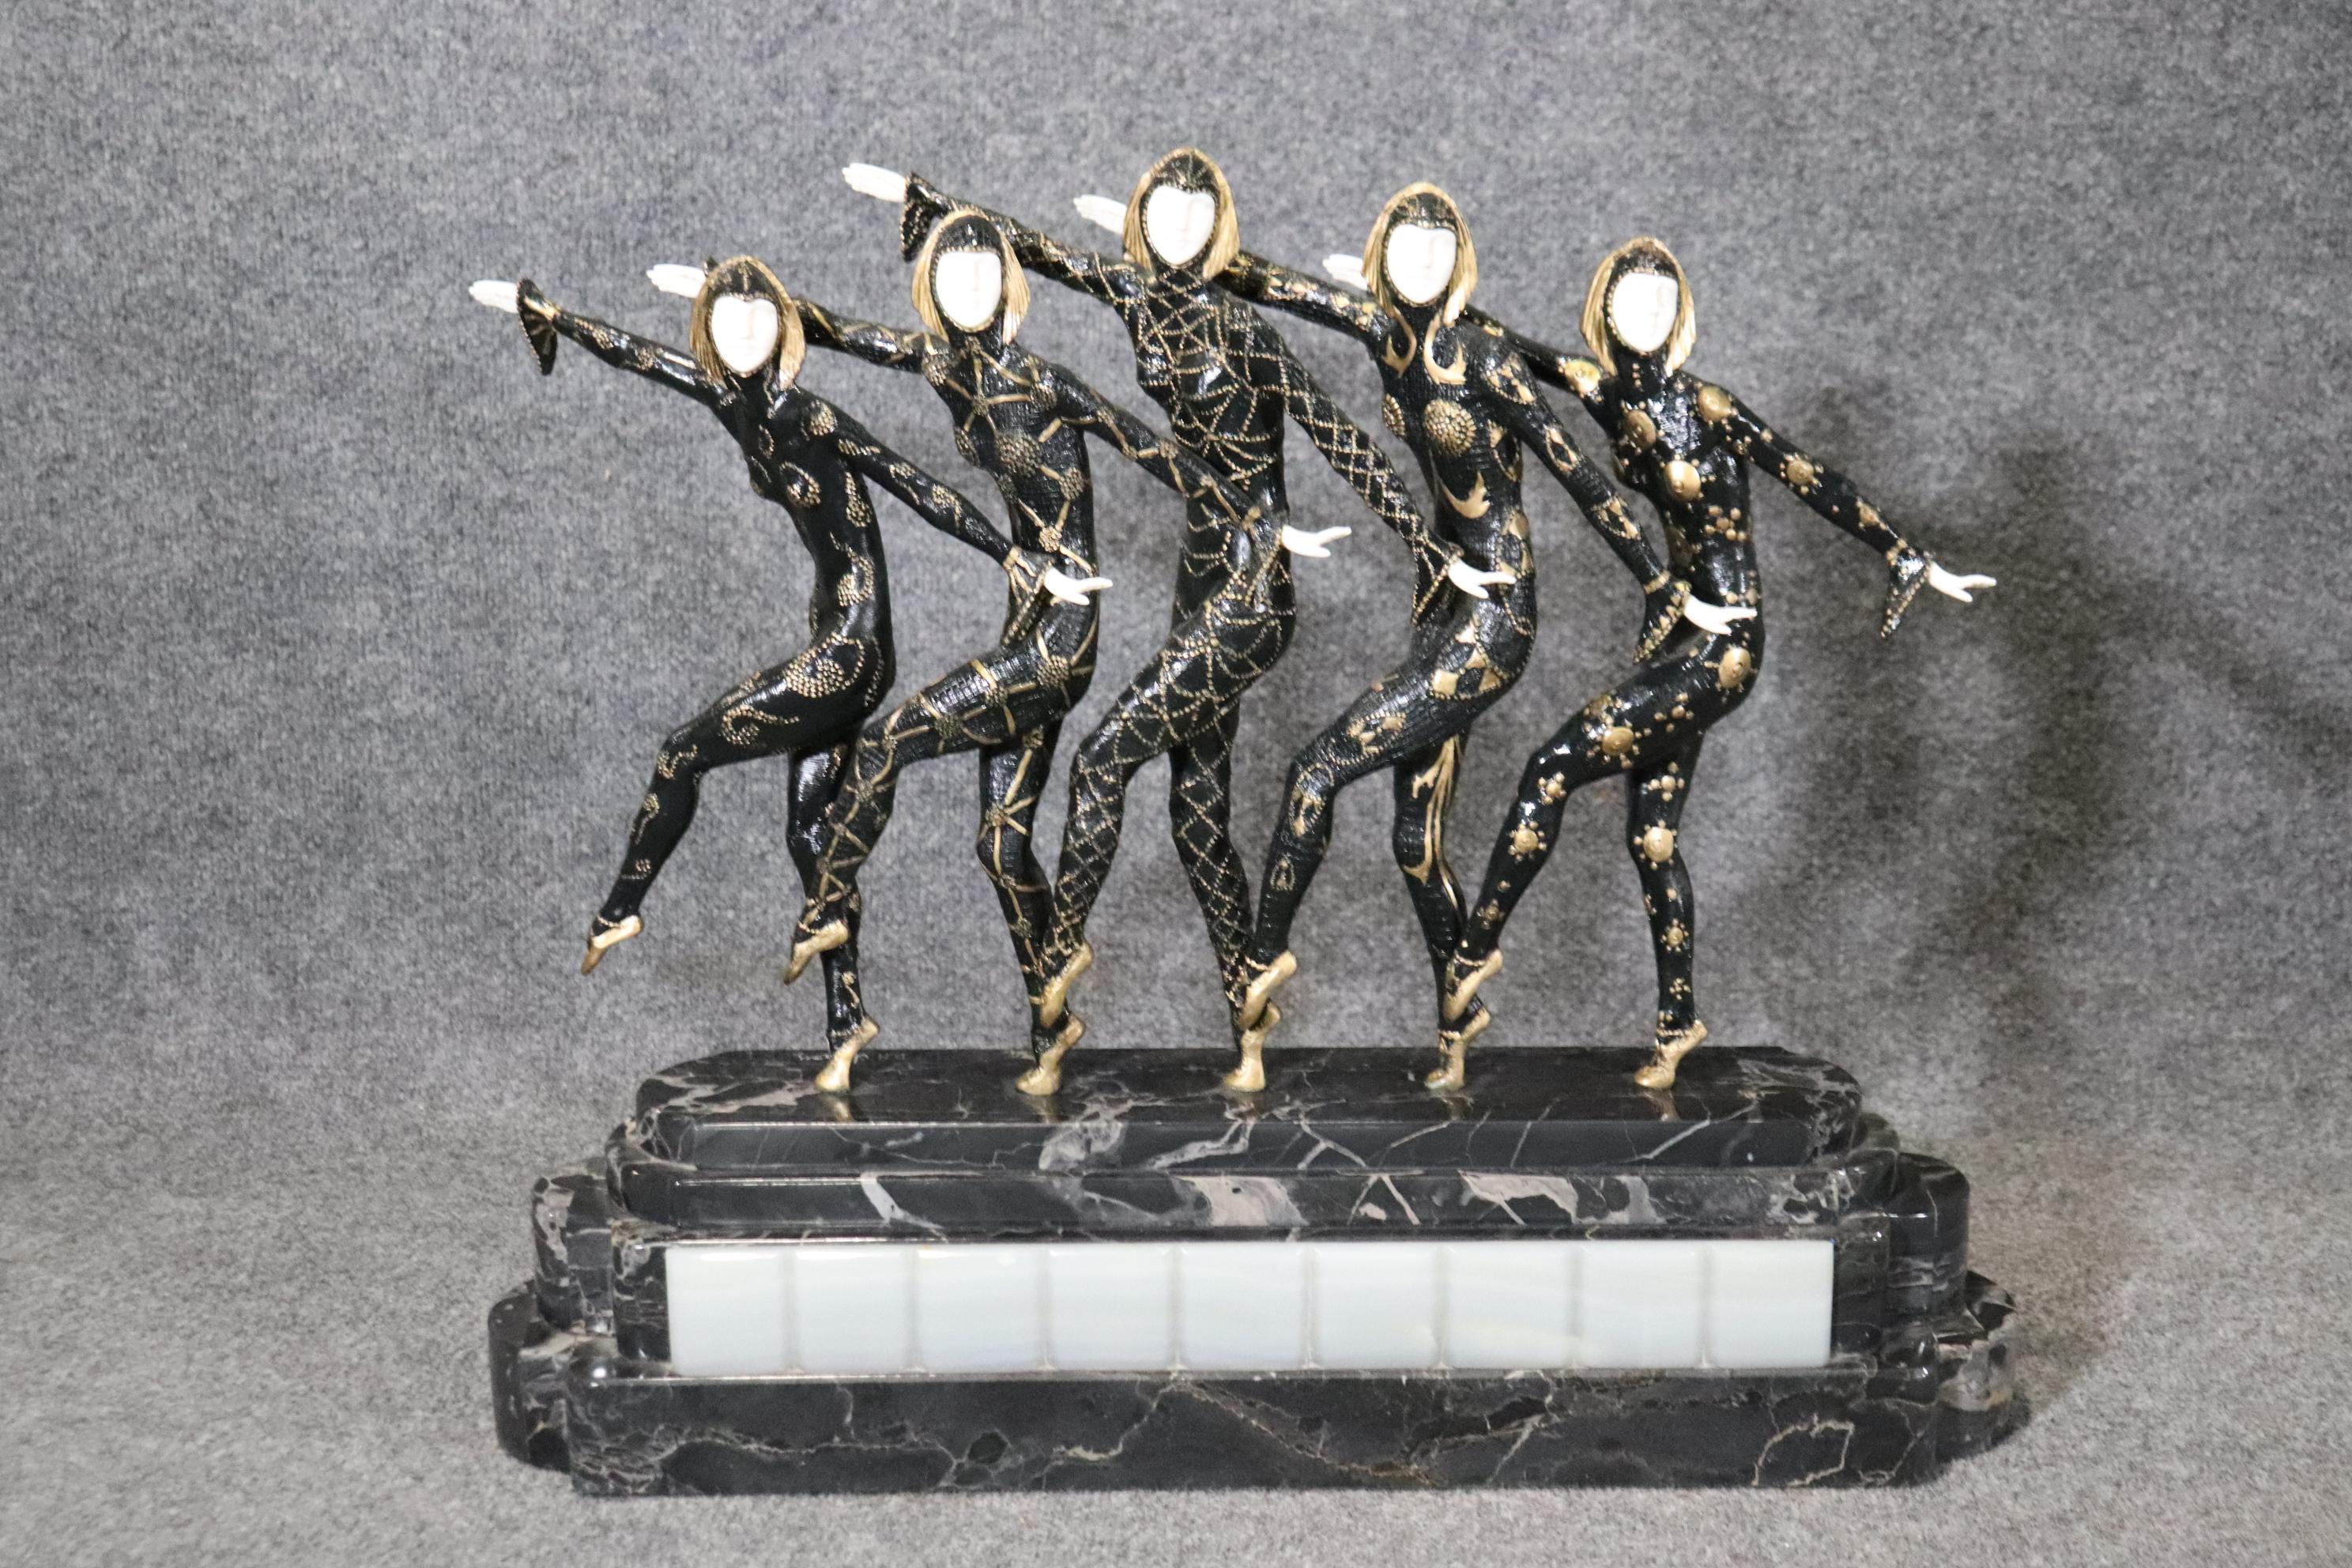 20th Century Signed French Art Deco Bronze Les Girls on Onyx Pedestal After Demetre Chiparus For Sale